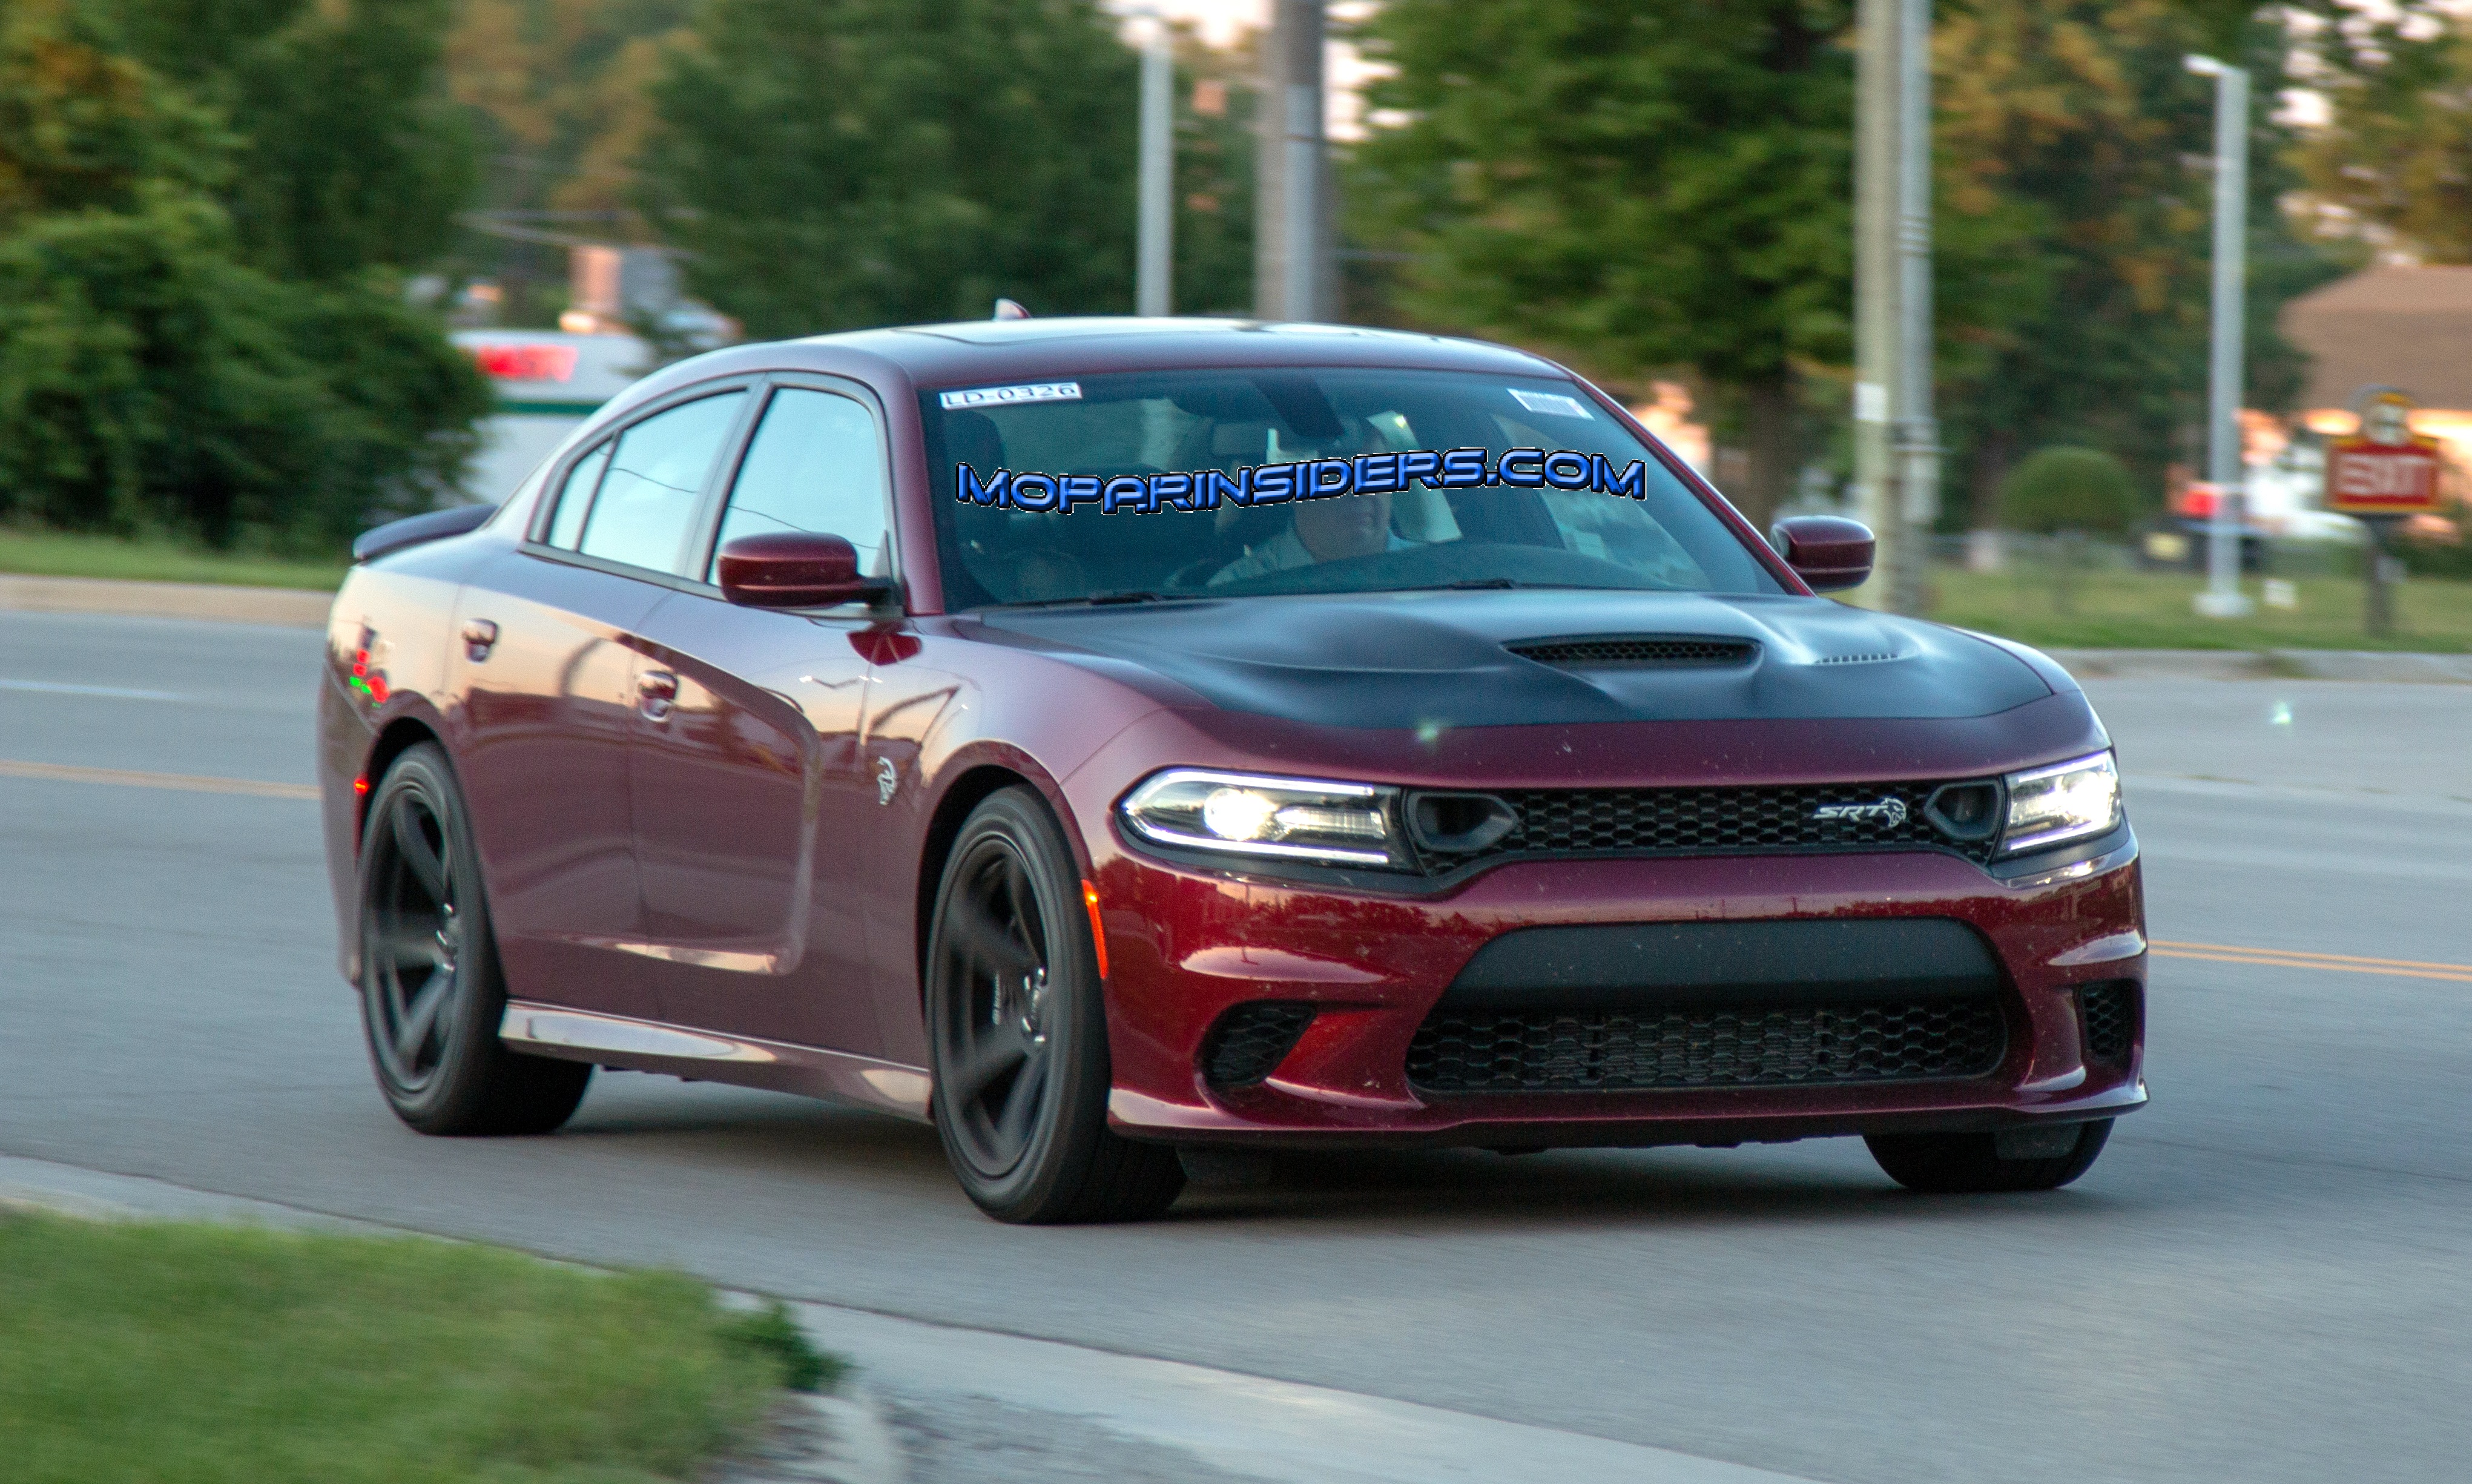 Updated 2019 Dodge Charger Srt Hellcat Pricing Options